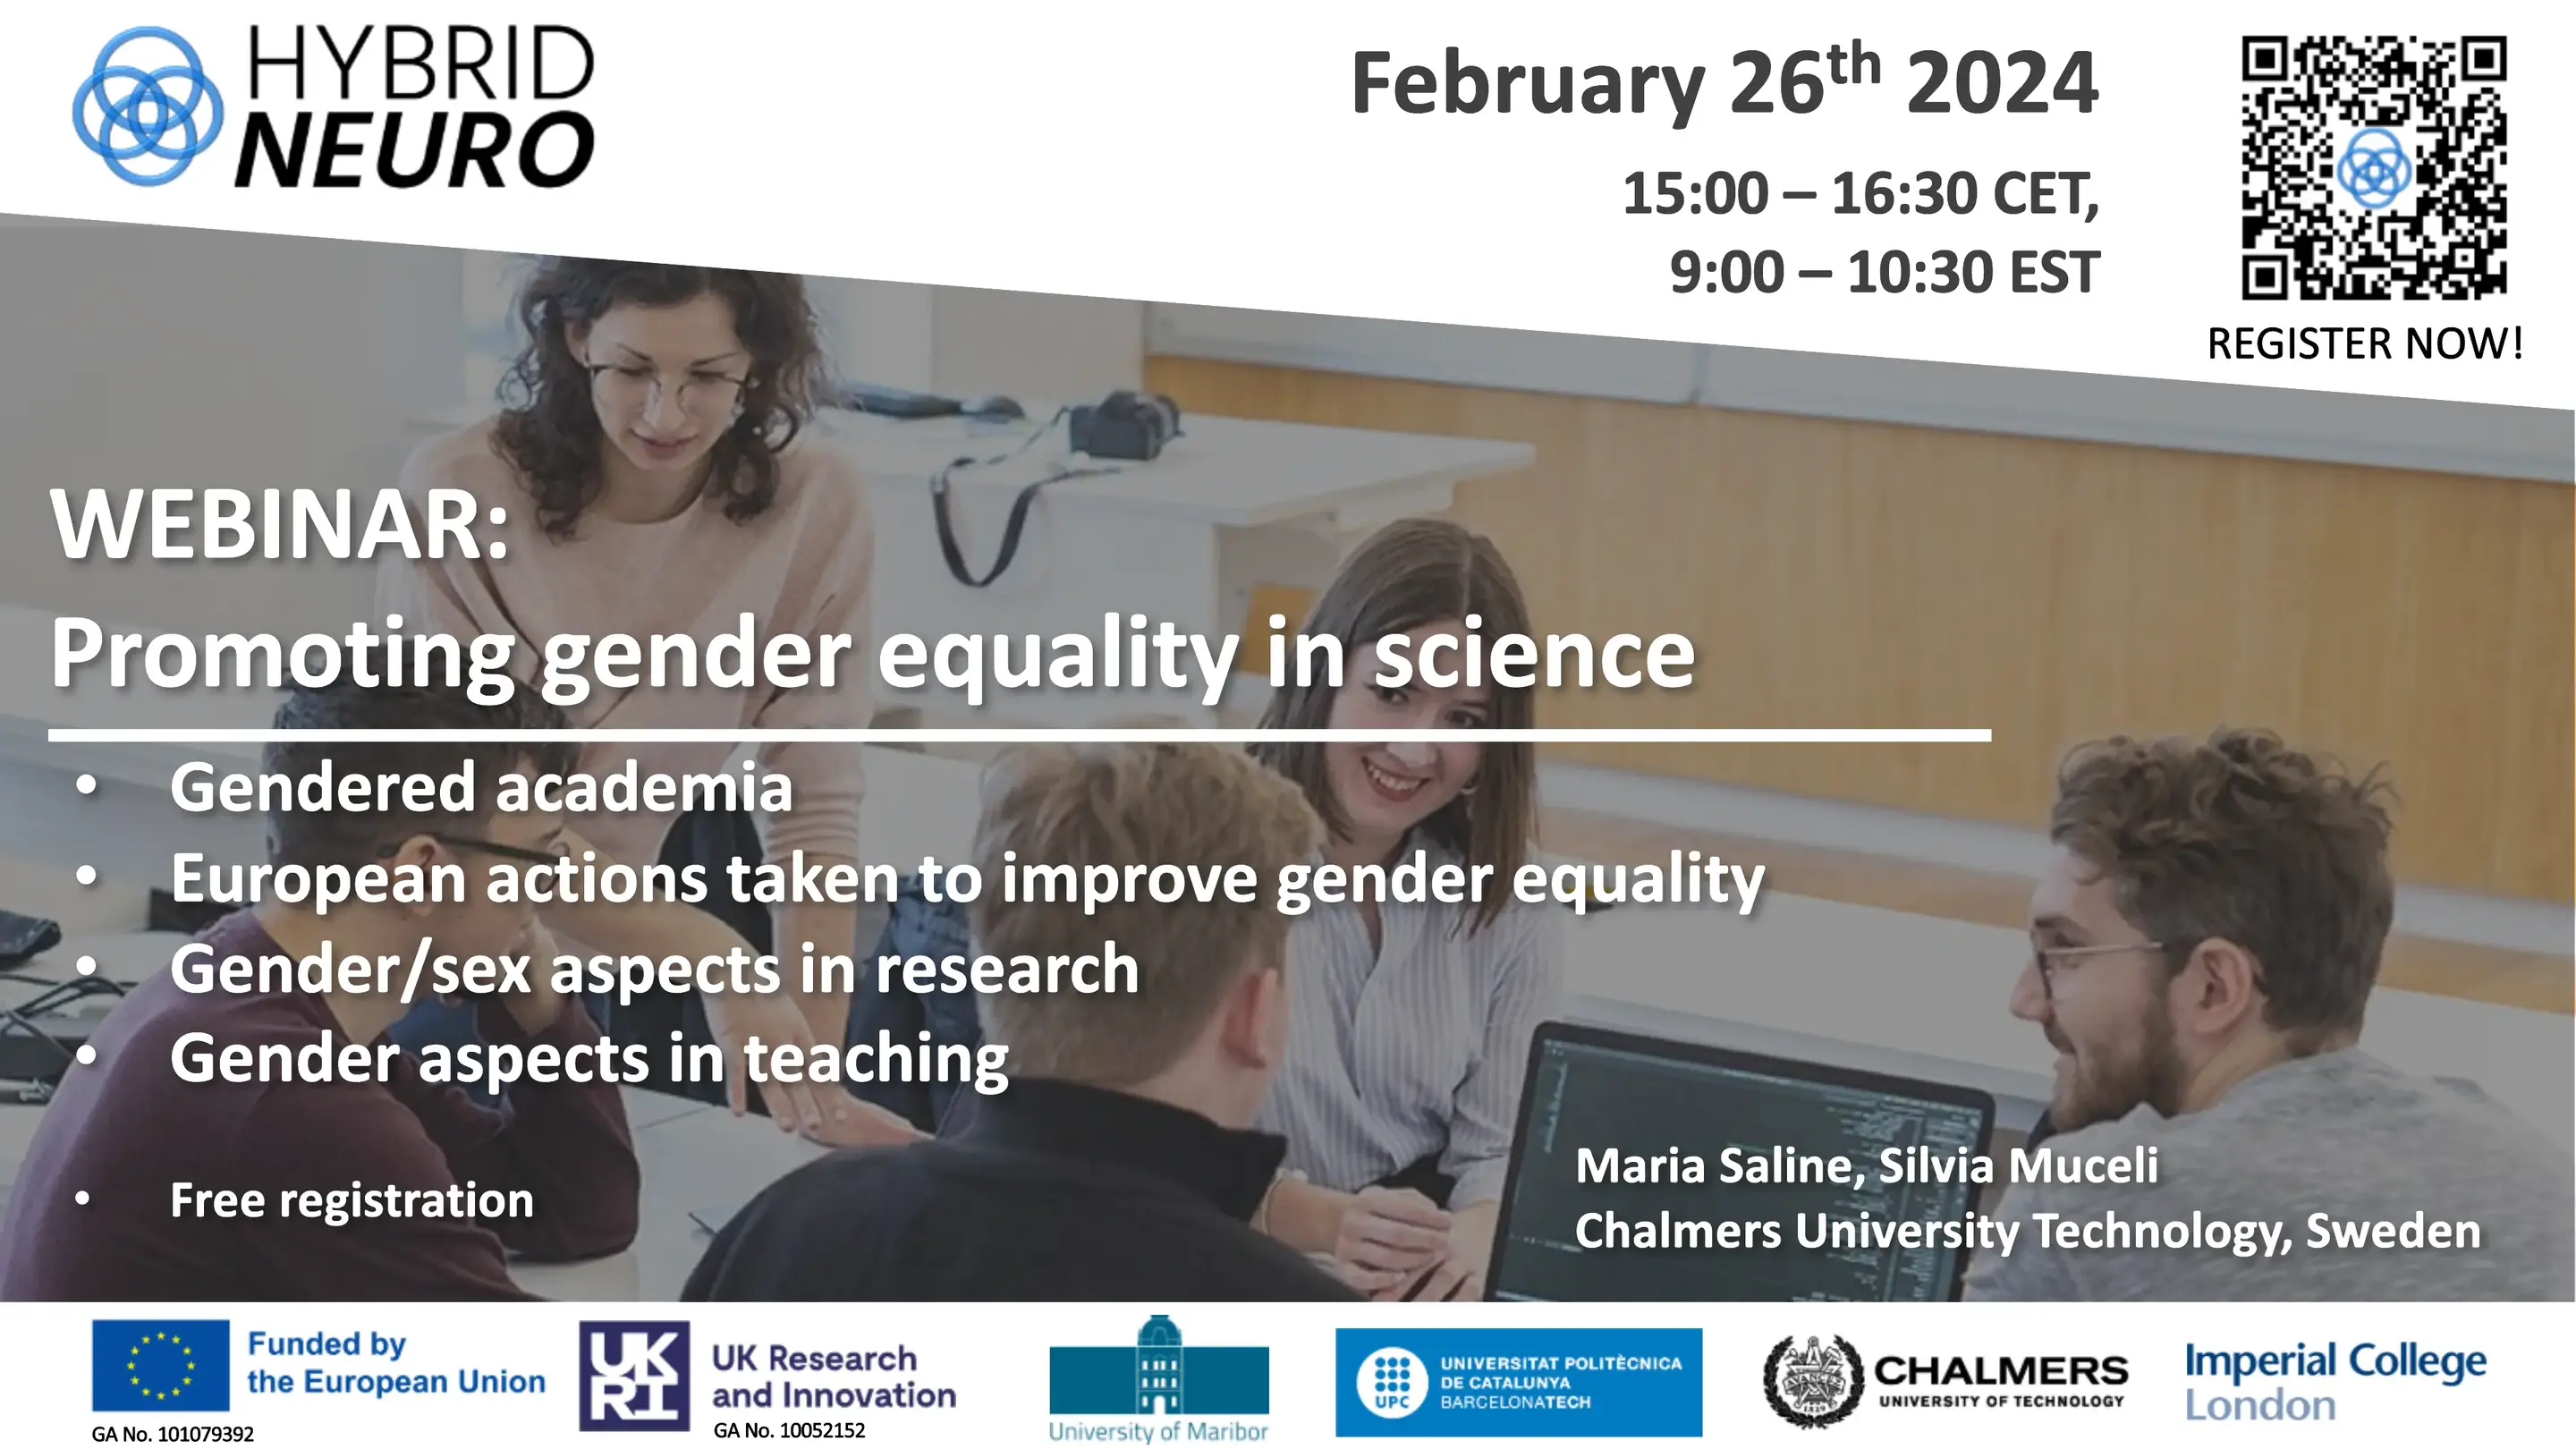 Promoting gender equality in science